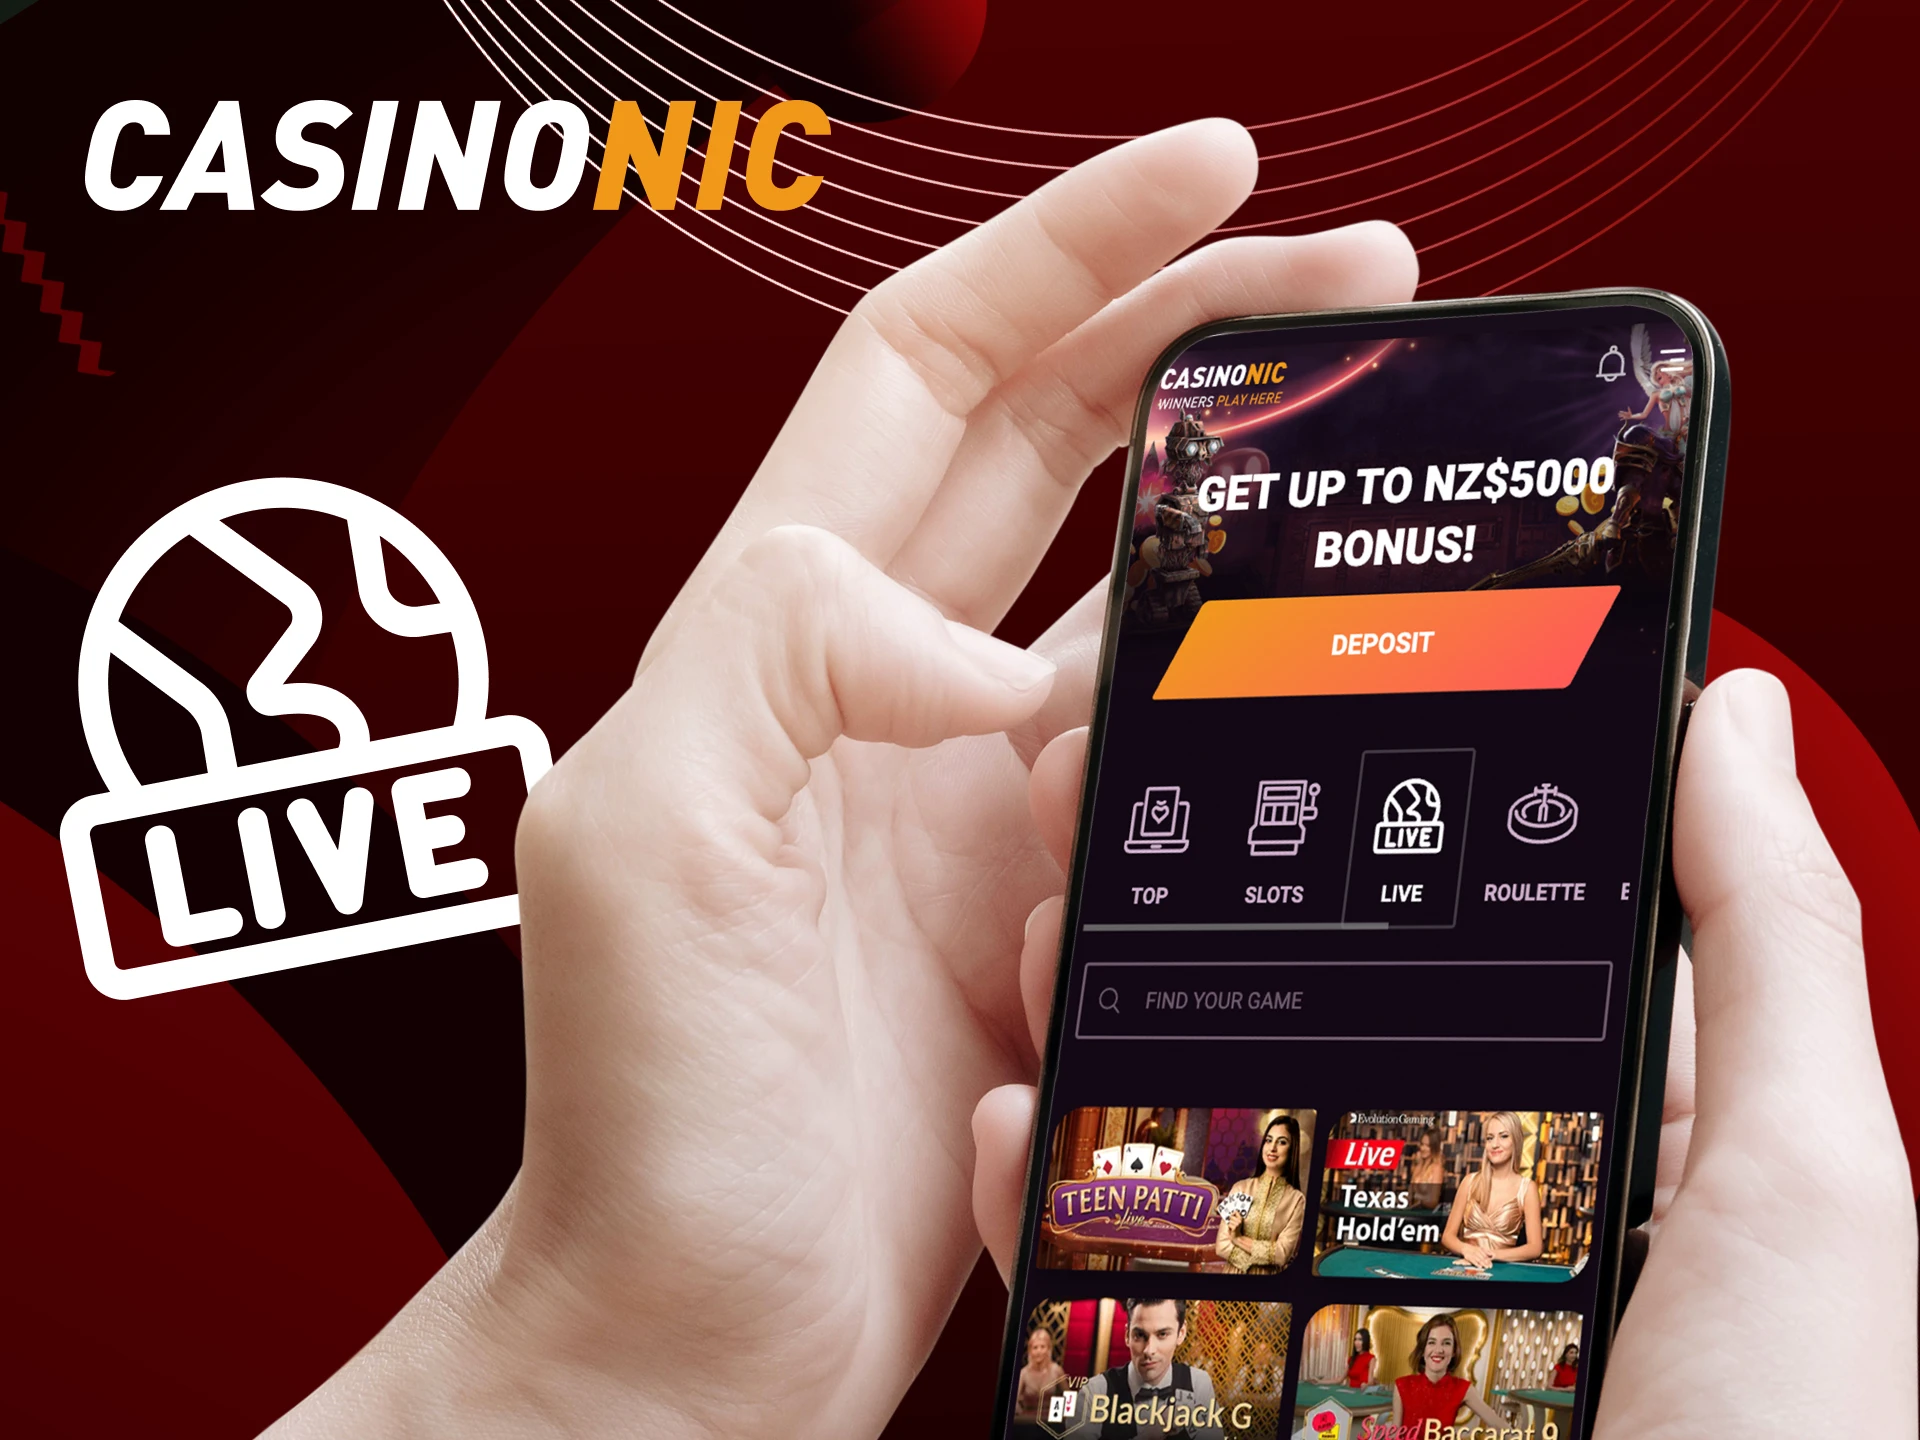 What is a live casino in the online casino CasinoNic.